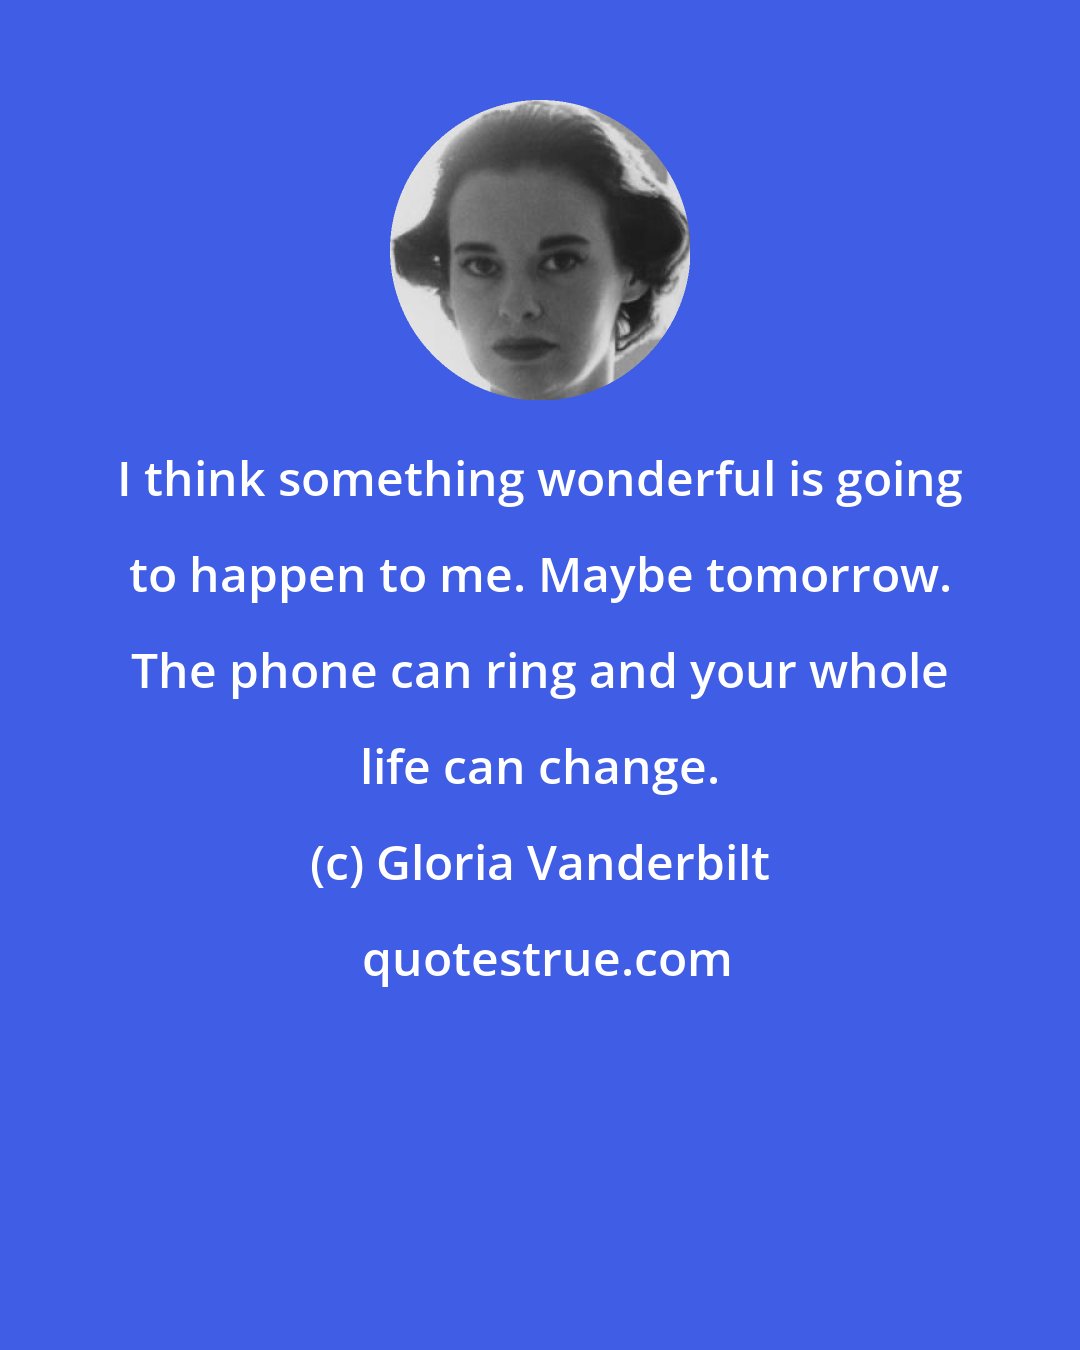 Gloria Vanderbilt: I think something wonderful is going to happen to me. Maybe tomorrow. The phone can ring and your whole life can change.